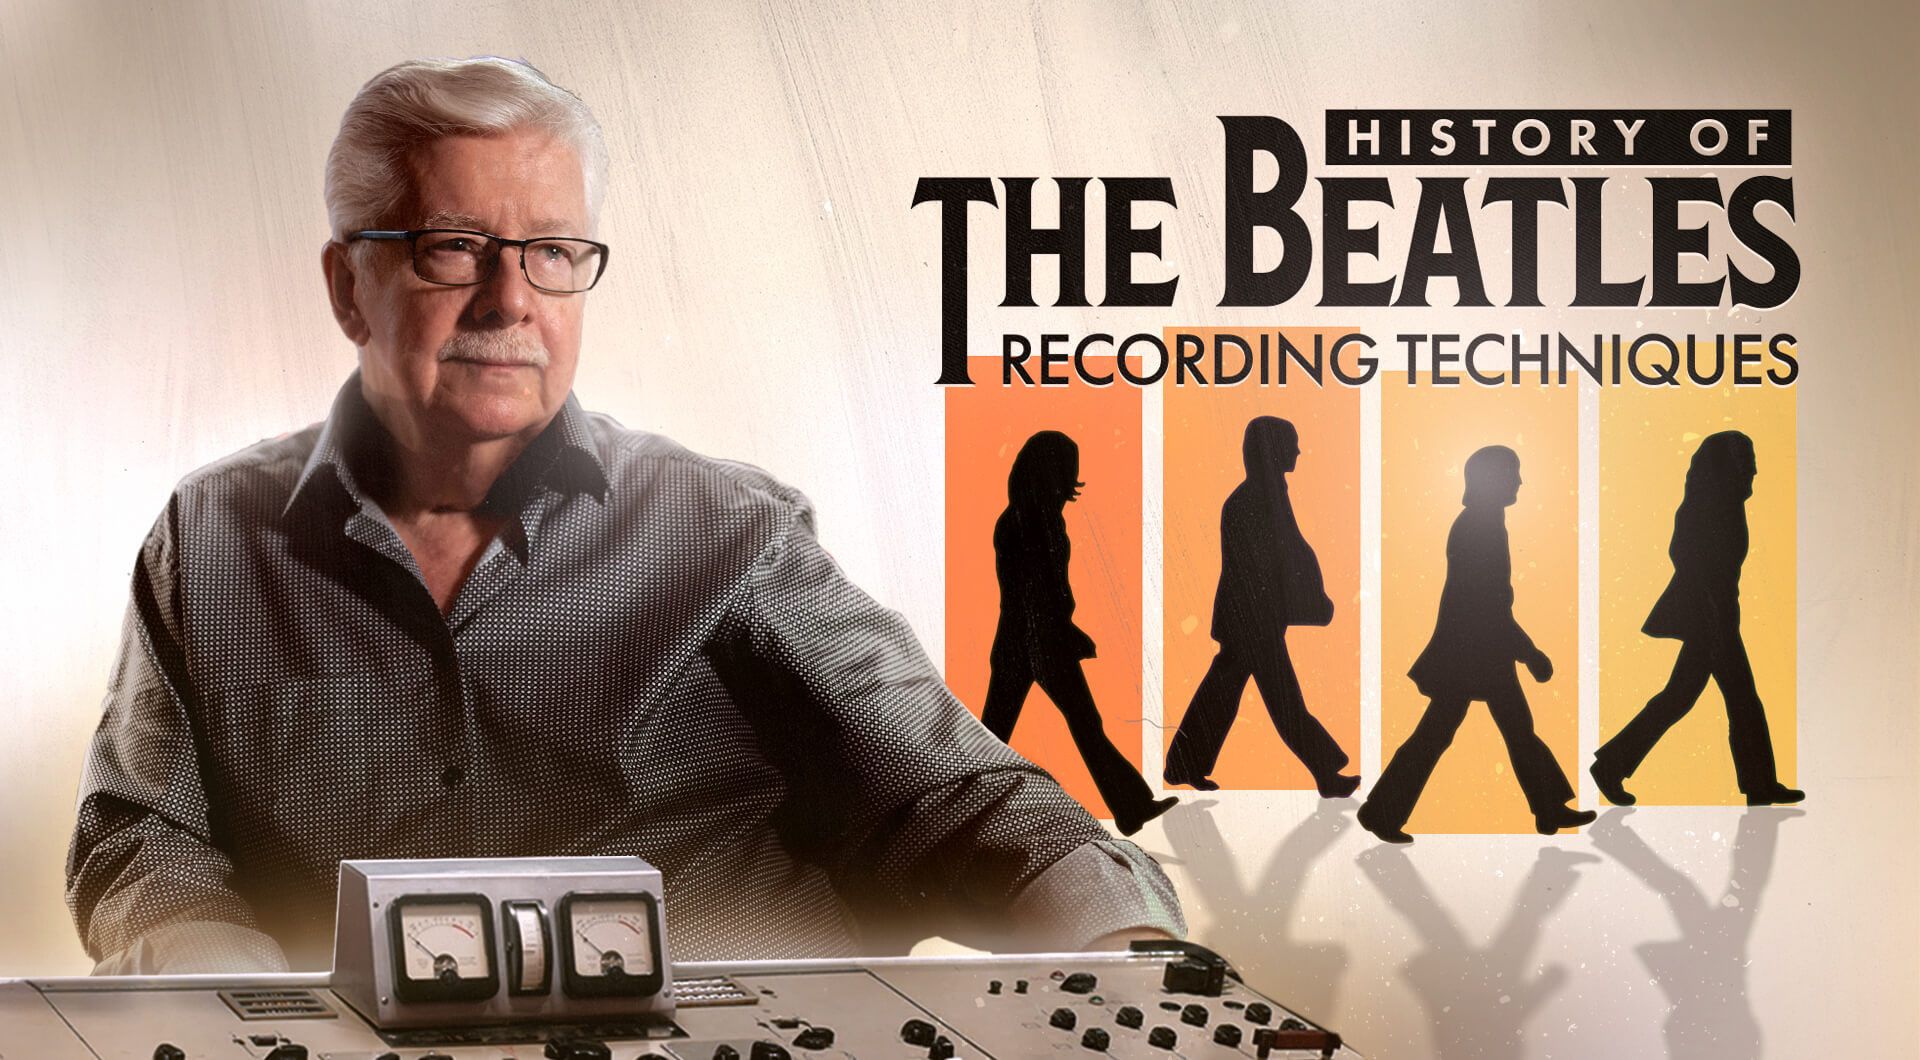 History of the Beatles Recording Techniques